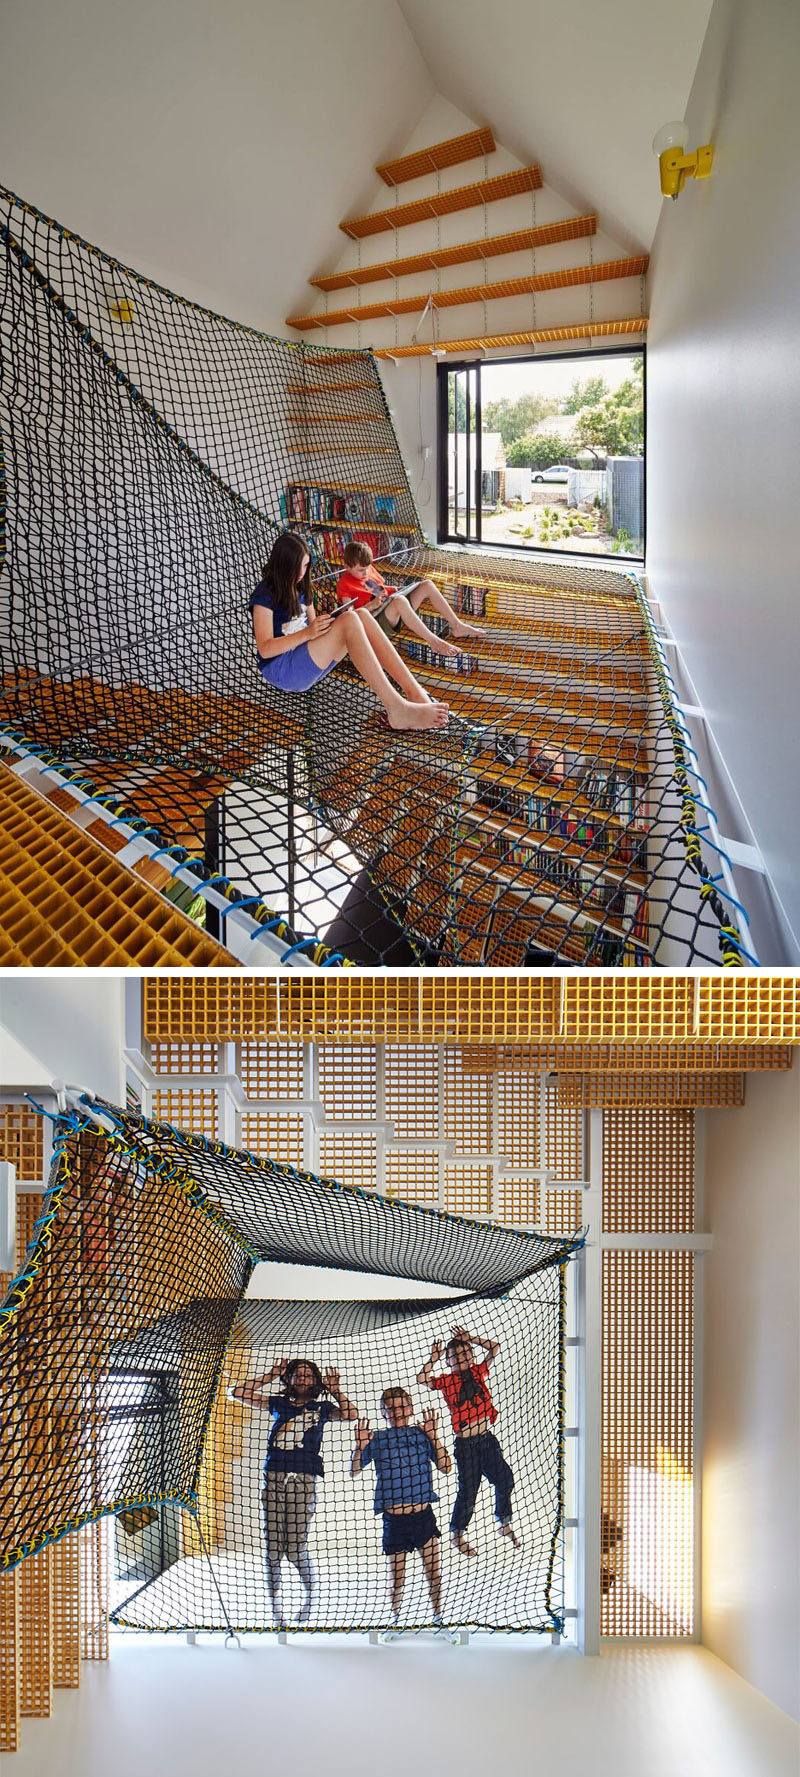 This book room features a large system of suspended nets that create the perfect spot to curl up with a book, a game, or spy on the people down below.